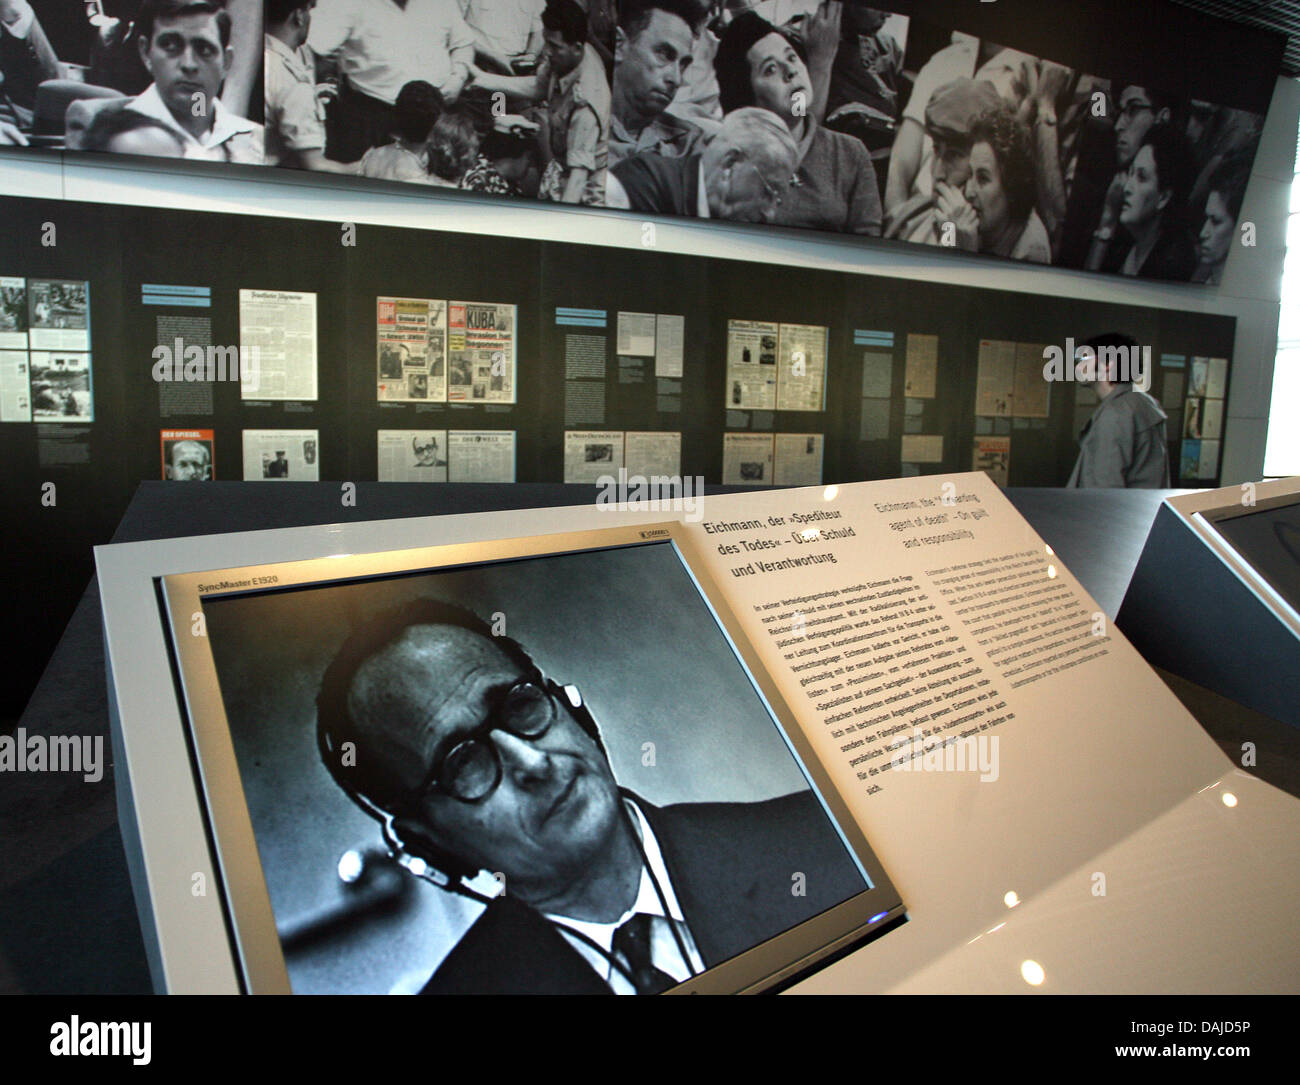 A visitor walks through the exhibition 'Facing Justice - Adolf Eichmann on trial (Der Prozess - Adolf Eichmann vor Gericht) in Berlin, Germany, 5 April 2011. The exhibition, which documents the trial against Nazi criminal Adolf Eichmann in 1961, will open at the 'Topography of Terror' foundation in Berlin on 6 April 2011. Photo: Stephanie Pilick Stock Photo